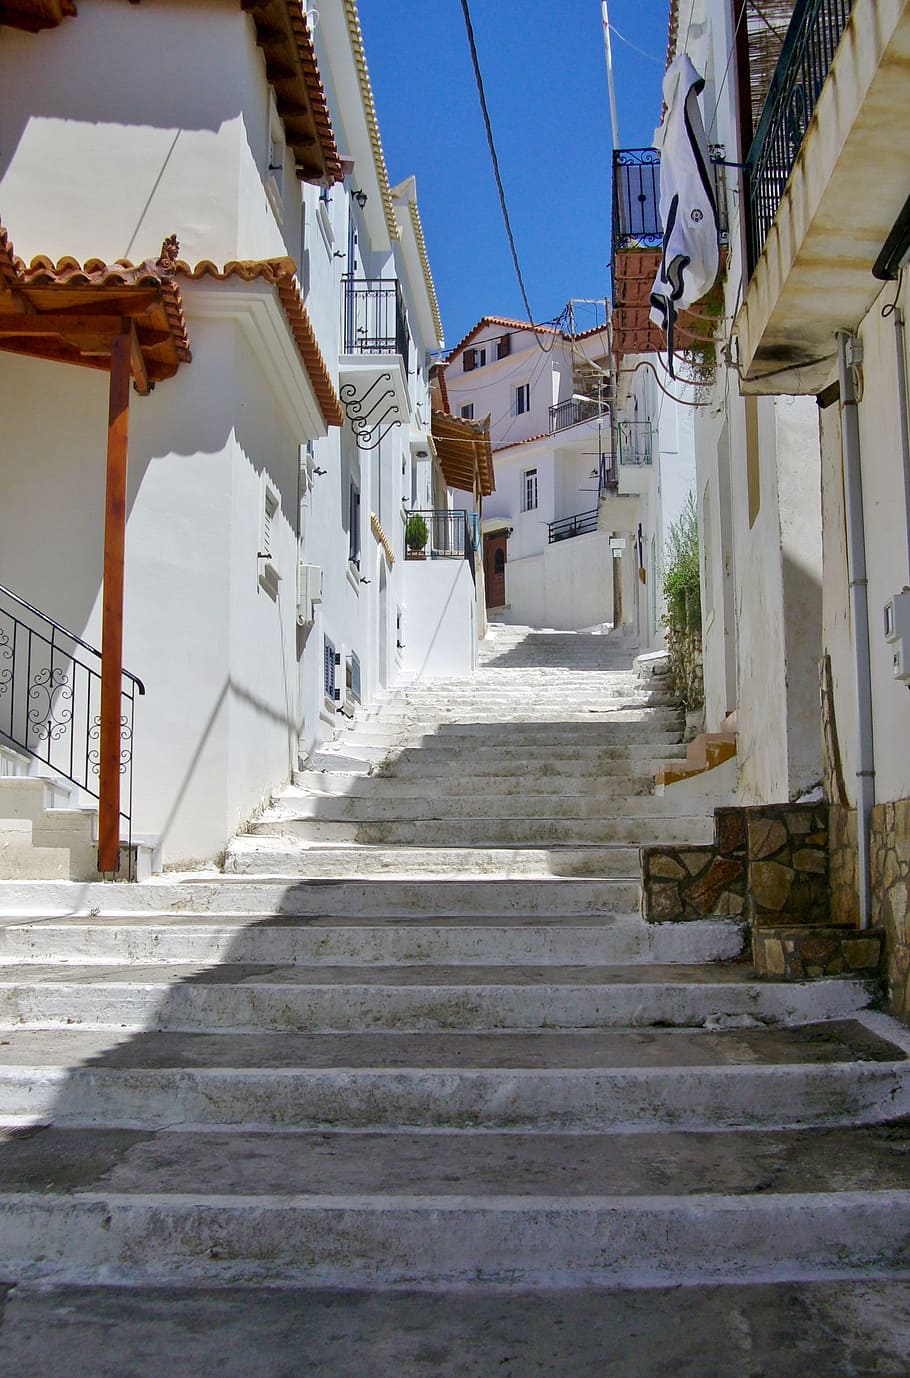 Alley, Pilos, Peloponnese, staircase, architecture, steps, house, street, cultures, greece